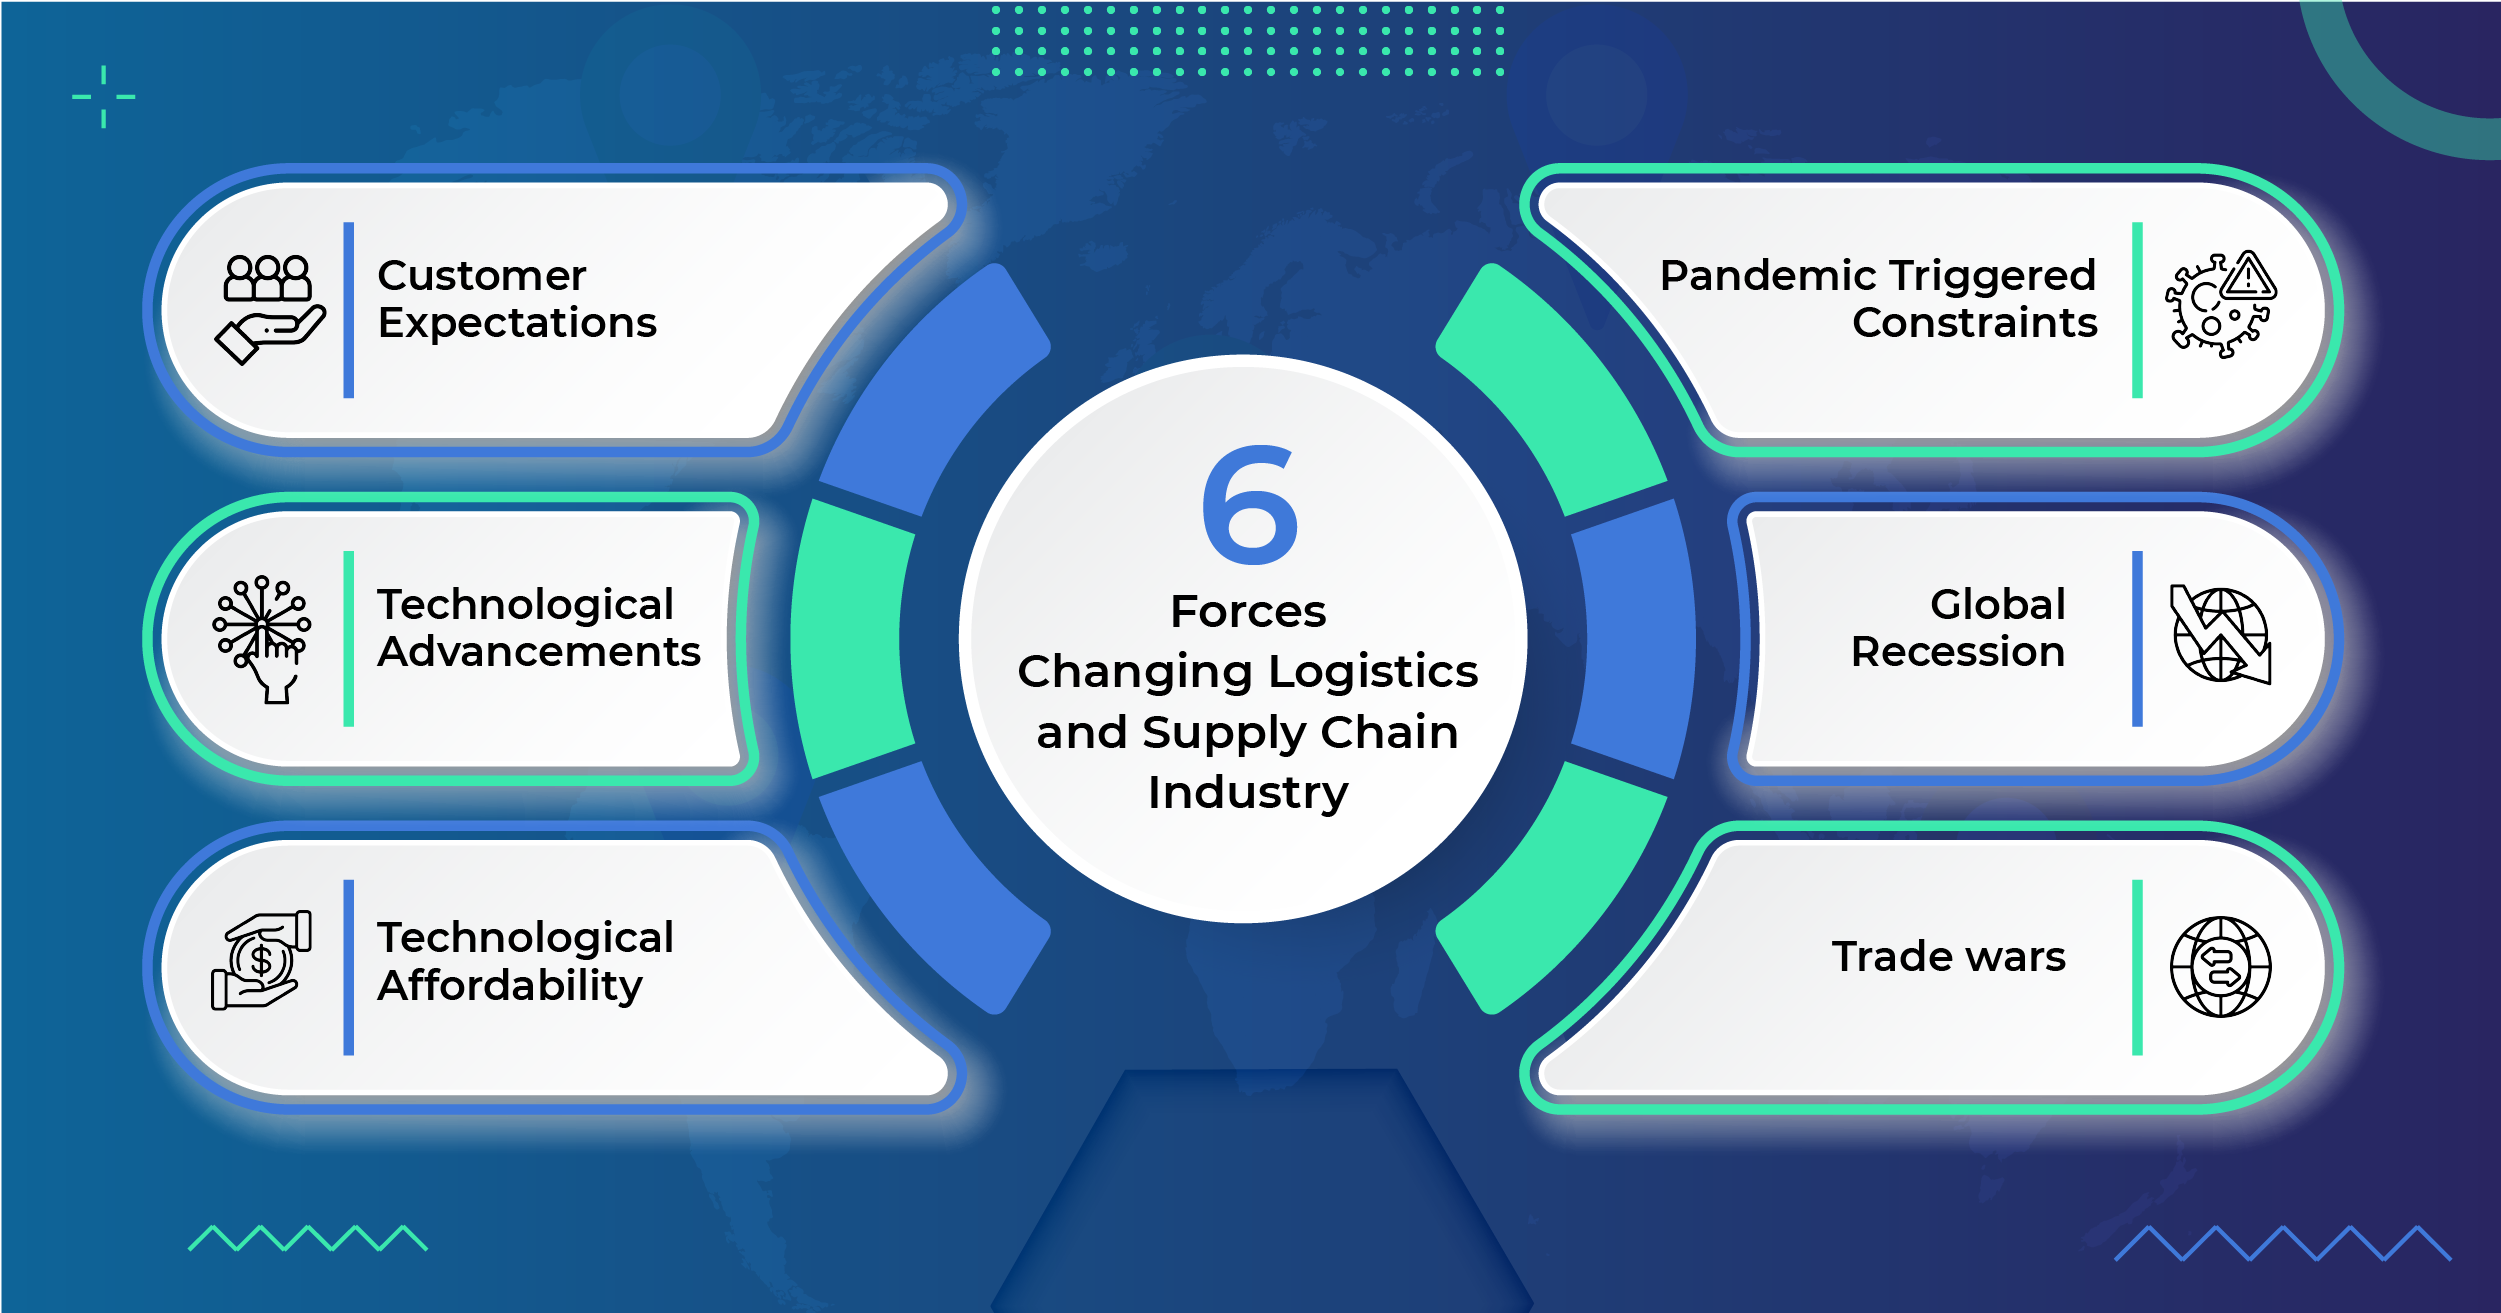 6 Forces Changing Logistics and Supply Chain Industry